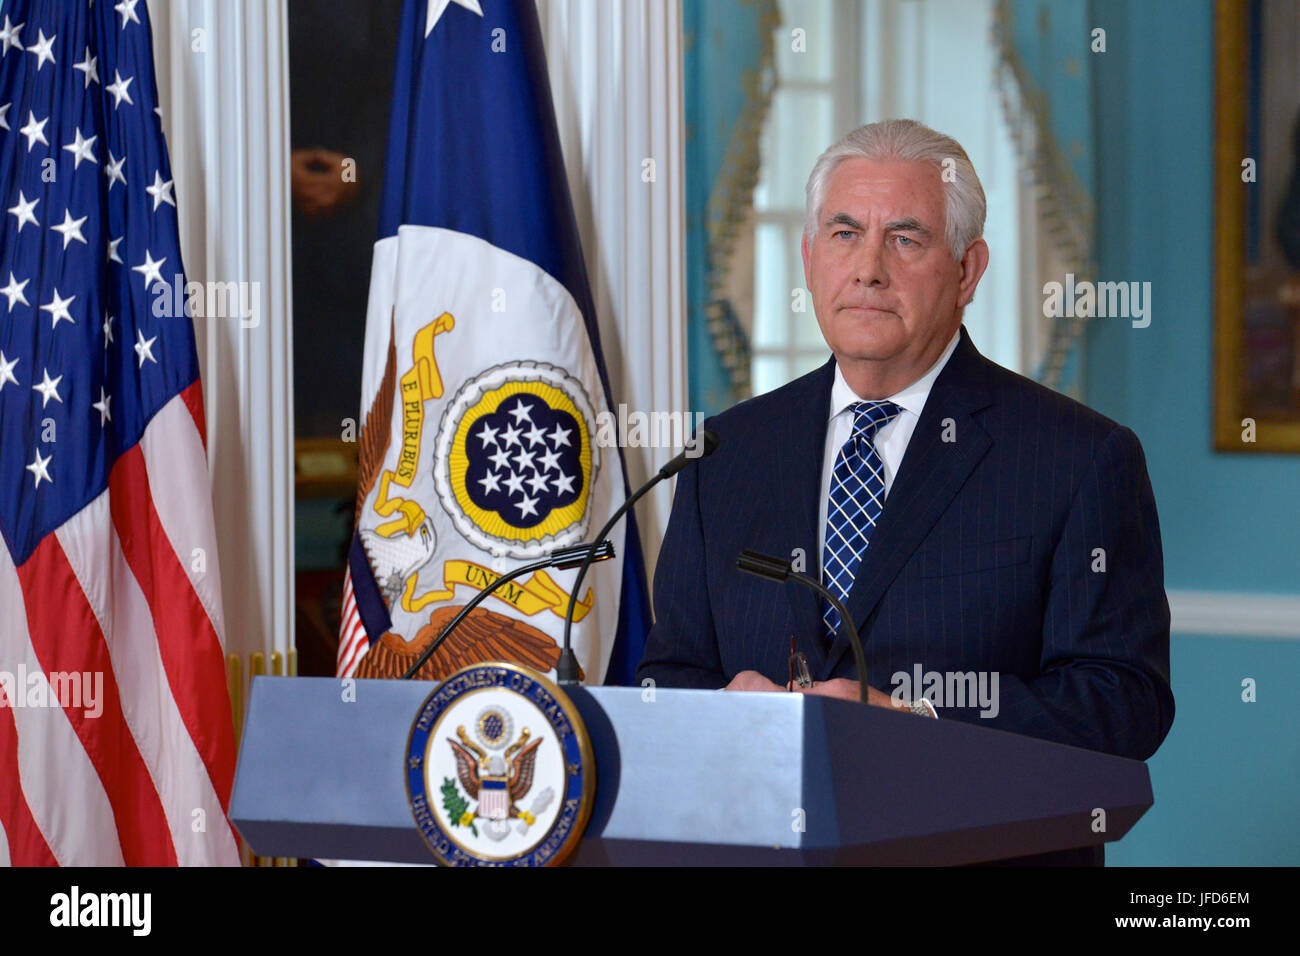 U.S. Secretary of State Rex Tillerson answers questions after delivering remarks at a press availability, at the U.S. Department of State in Washington, DC., April 19, 2017. Stock Photo